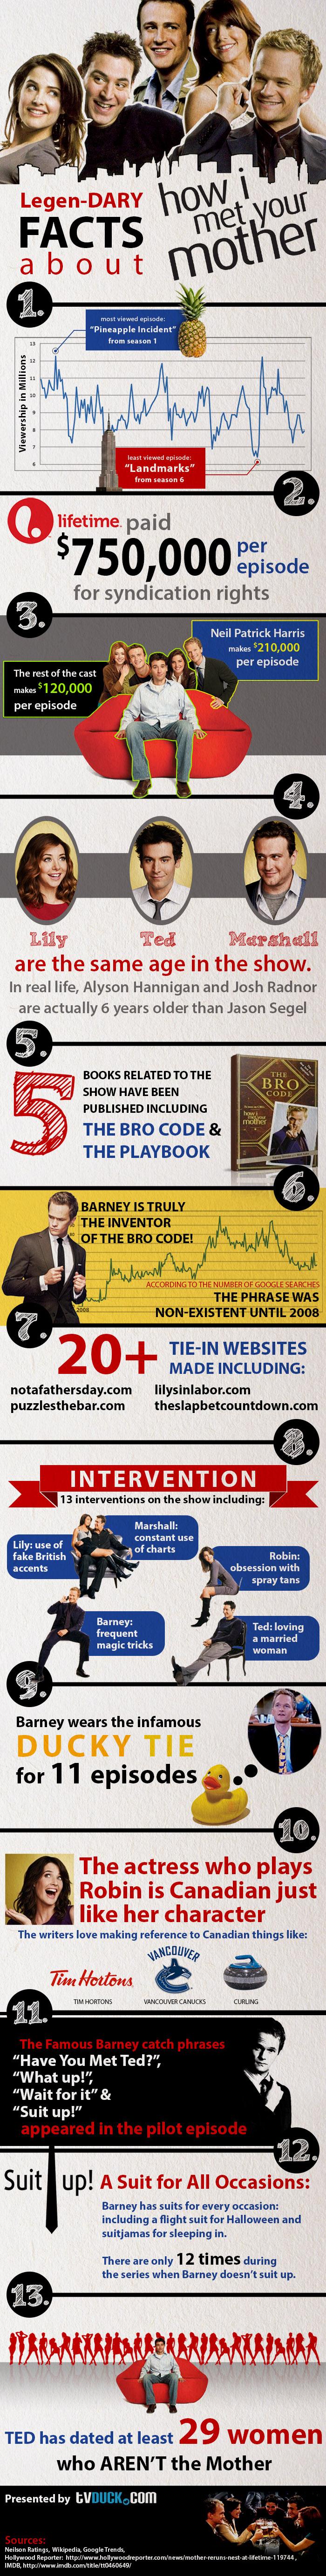 How I Met Your Mother infographic